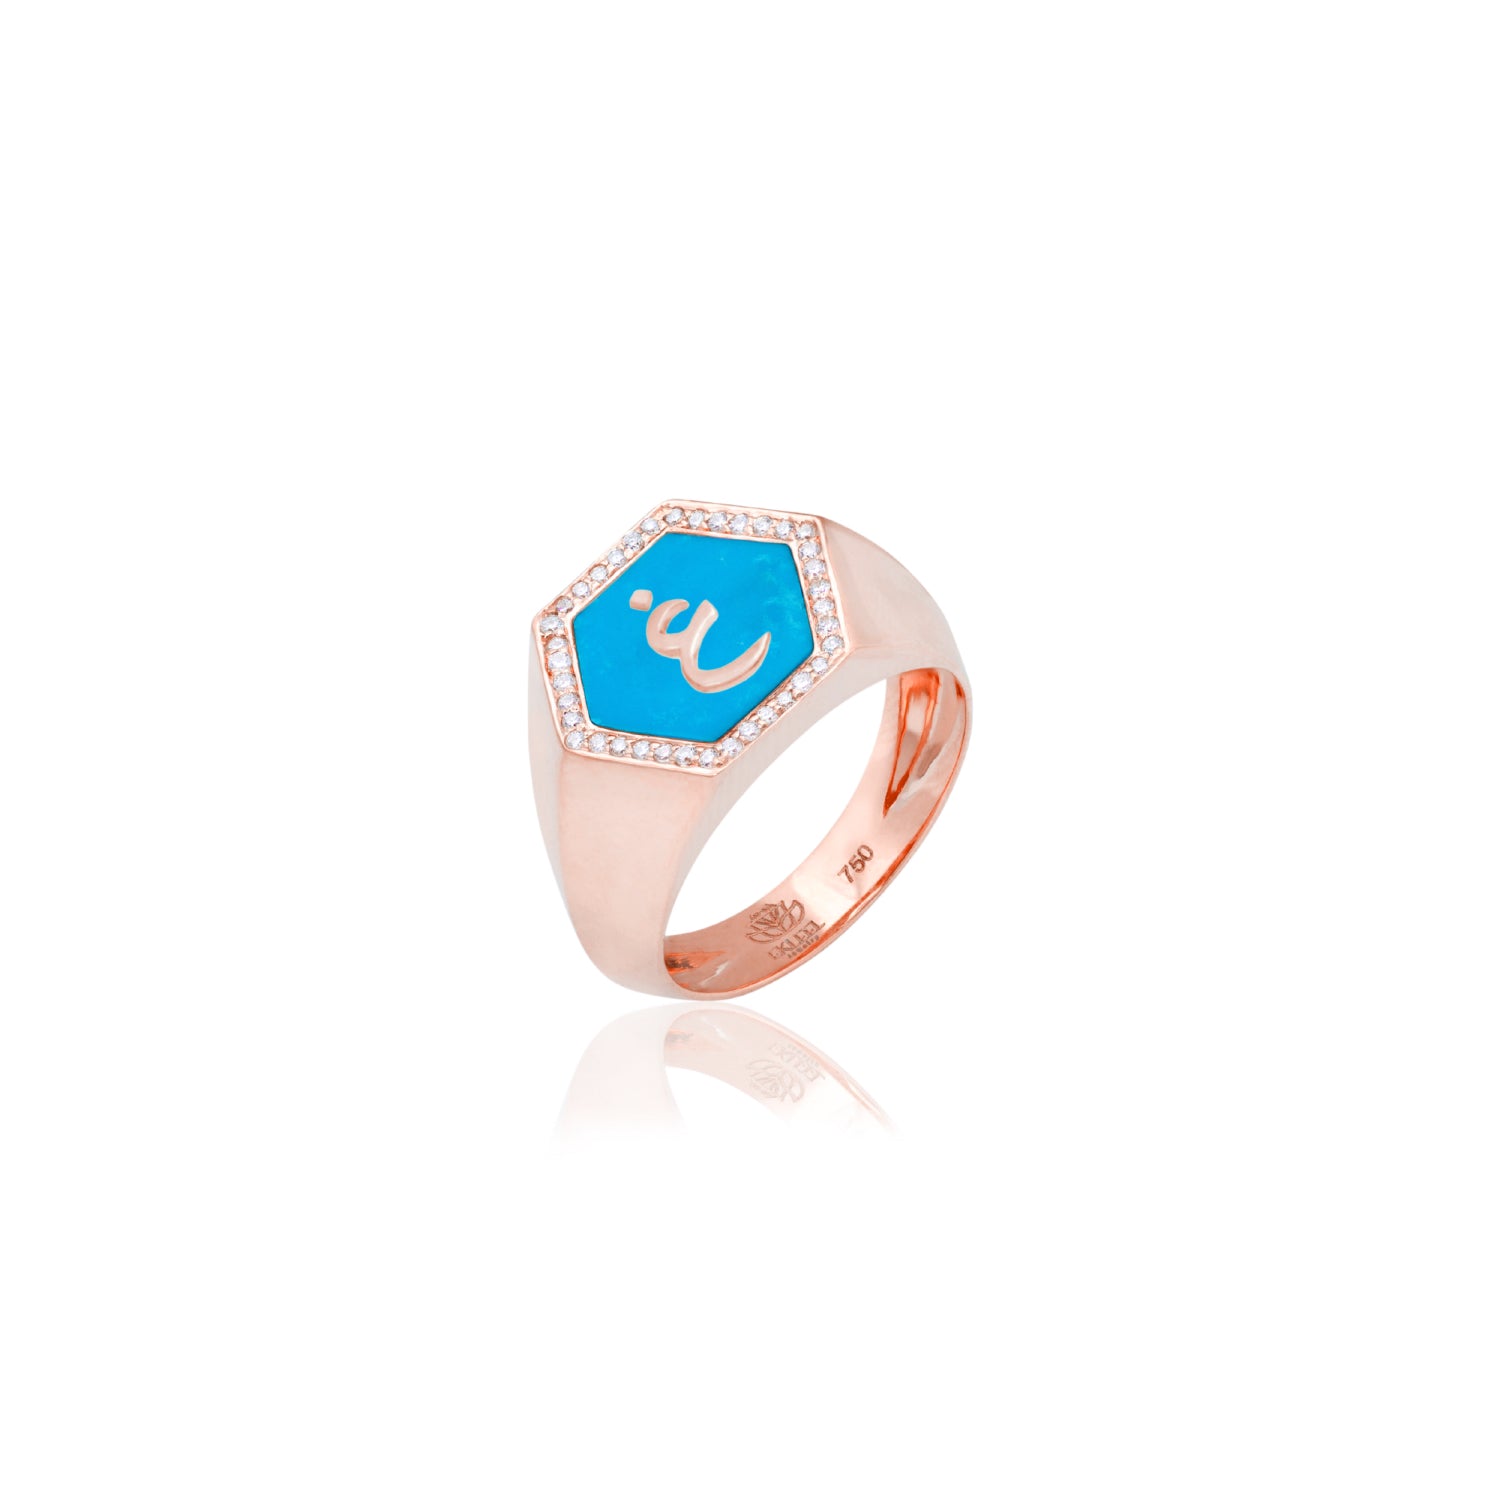 Qamoos 2.0 Letter غ Turquoise and Diamond Signet Ring in Rose Gold